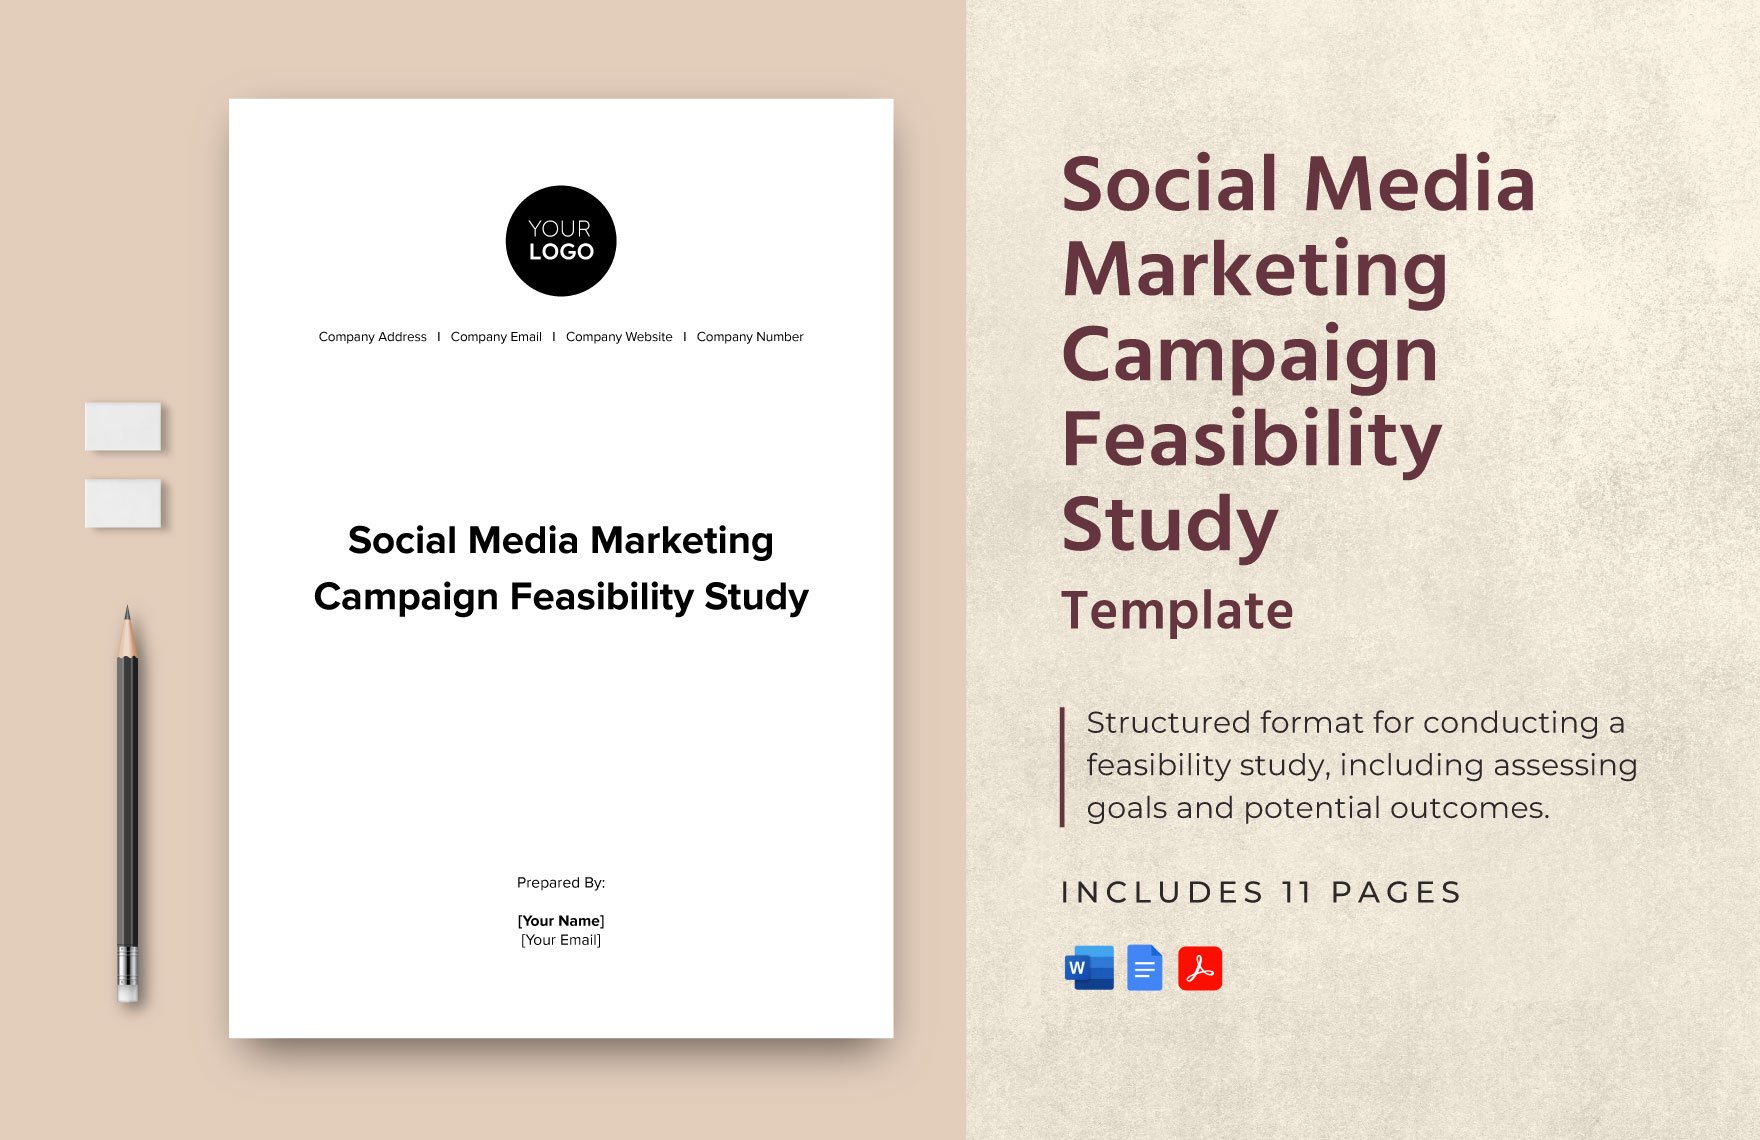 Social Media Marketing Campaign Feasibility Study Template